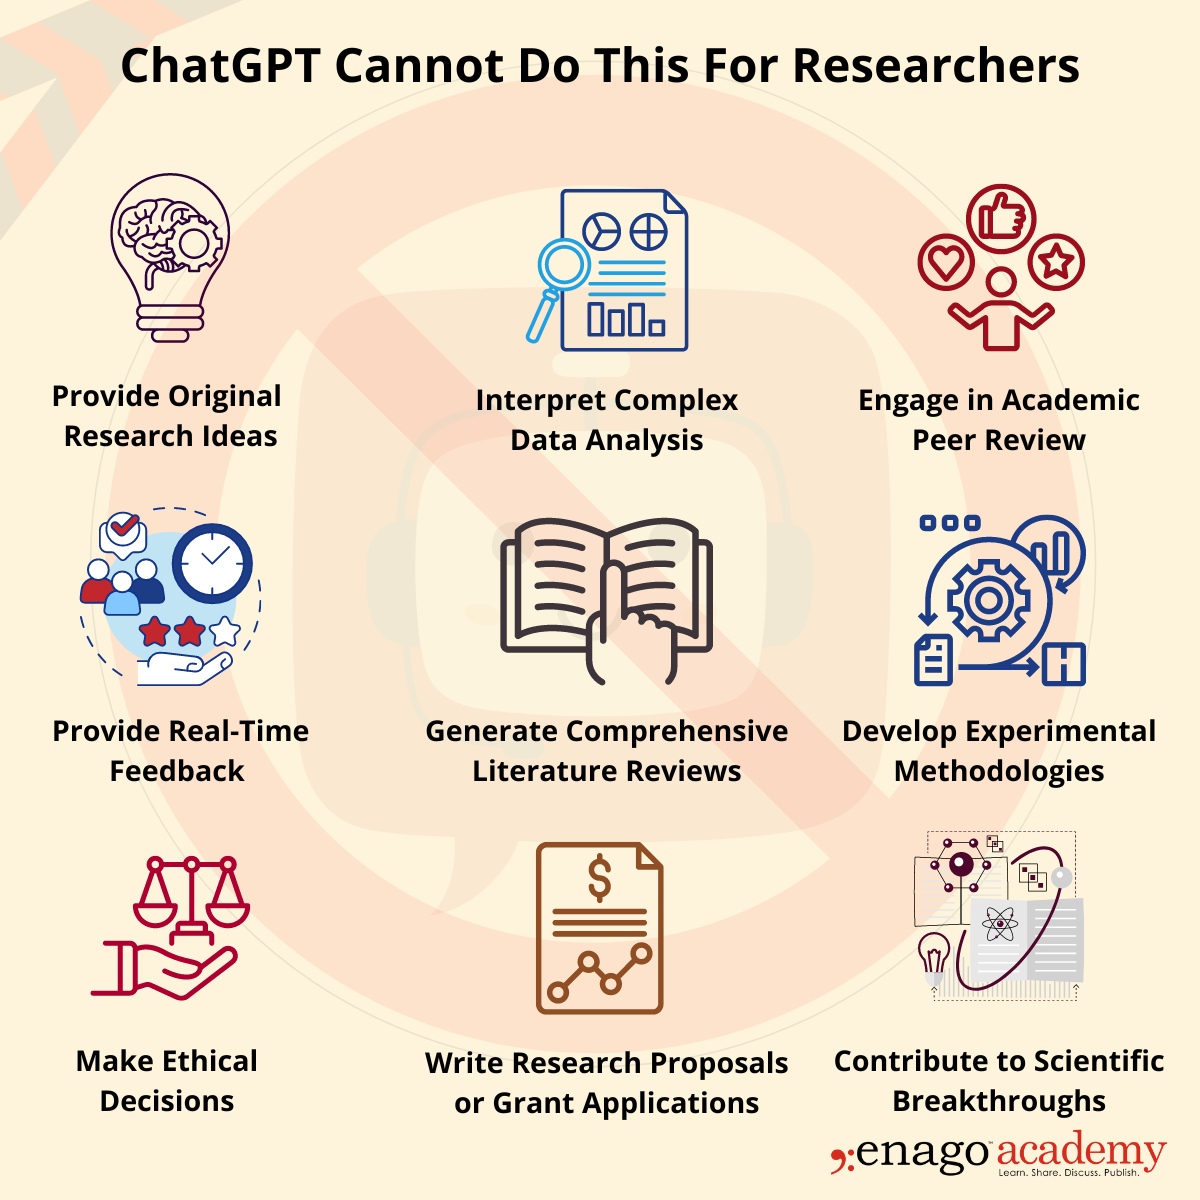 ChatGPT for researchers